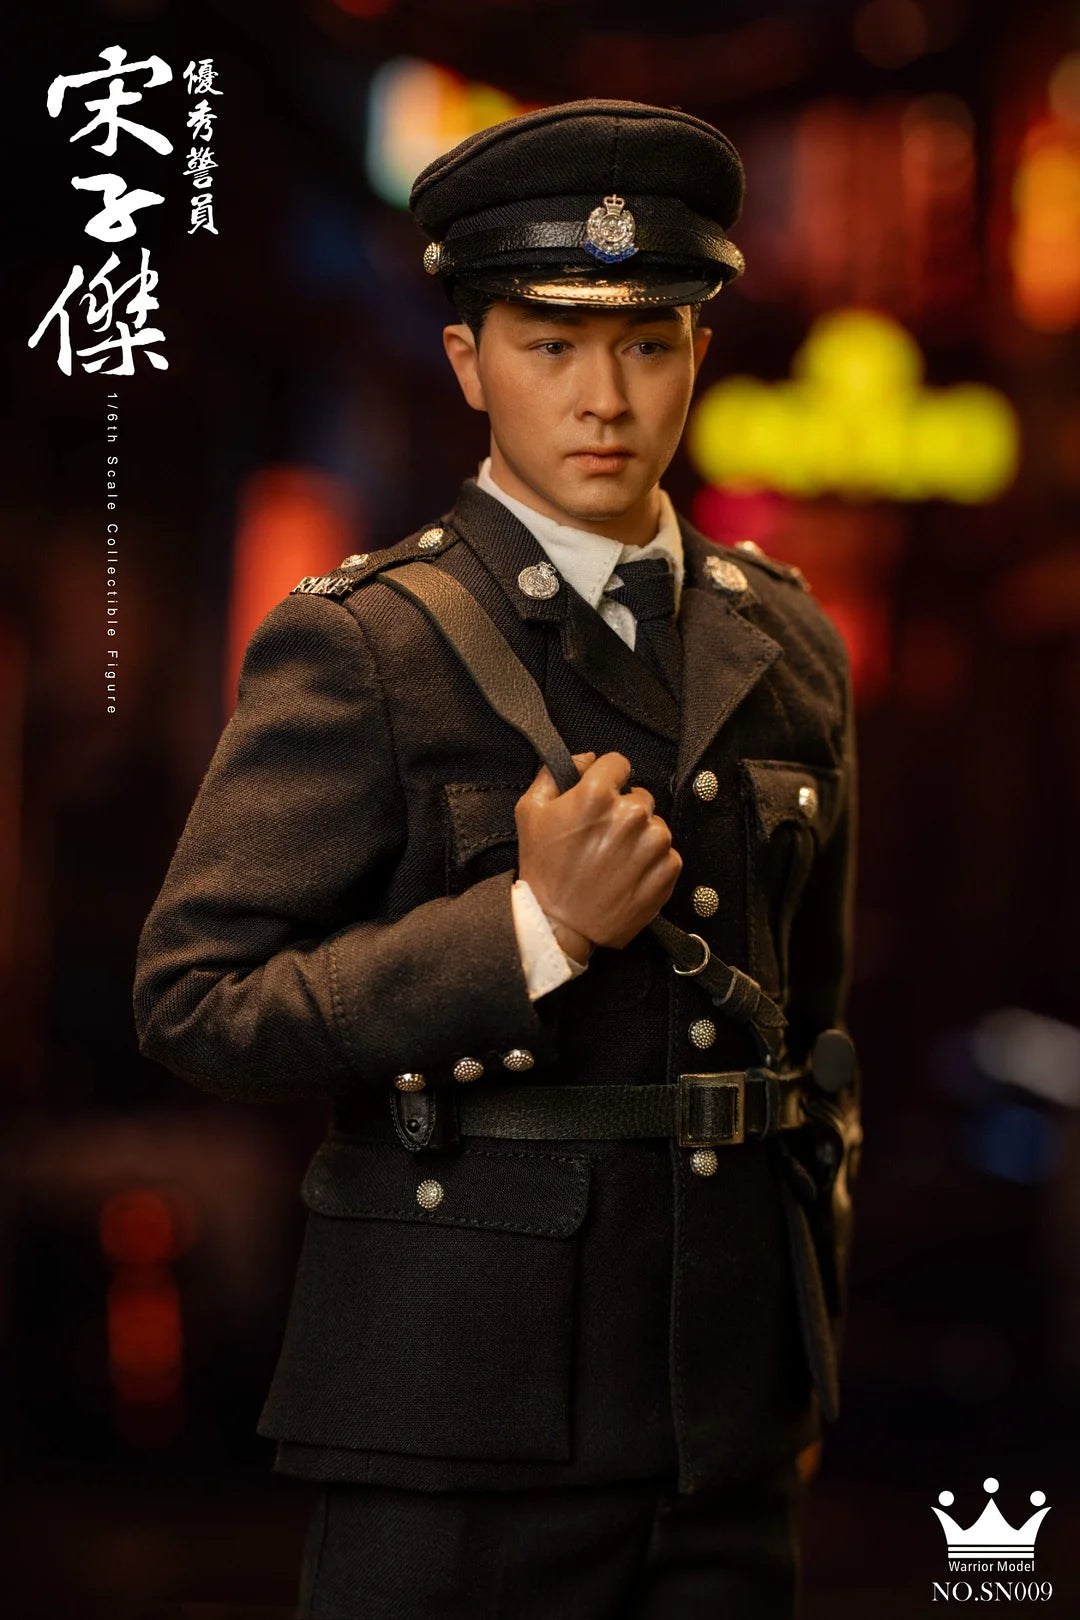 Warrior Model - SN009 - Royal Hong Kong Police - Officer Song Zijie (1/6 Scale) - Marvelous Toys